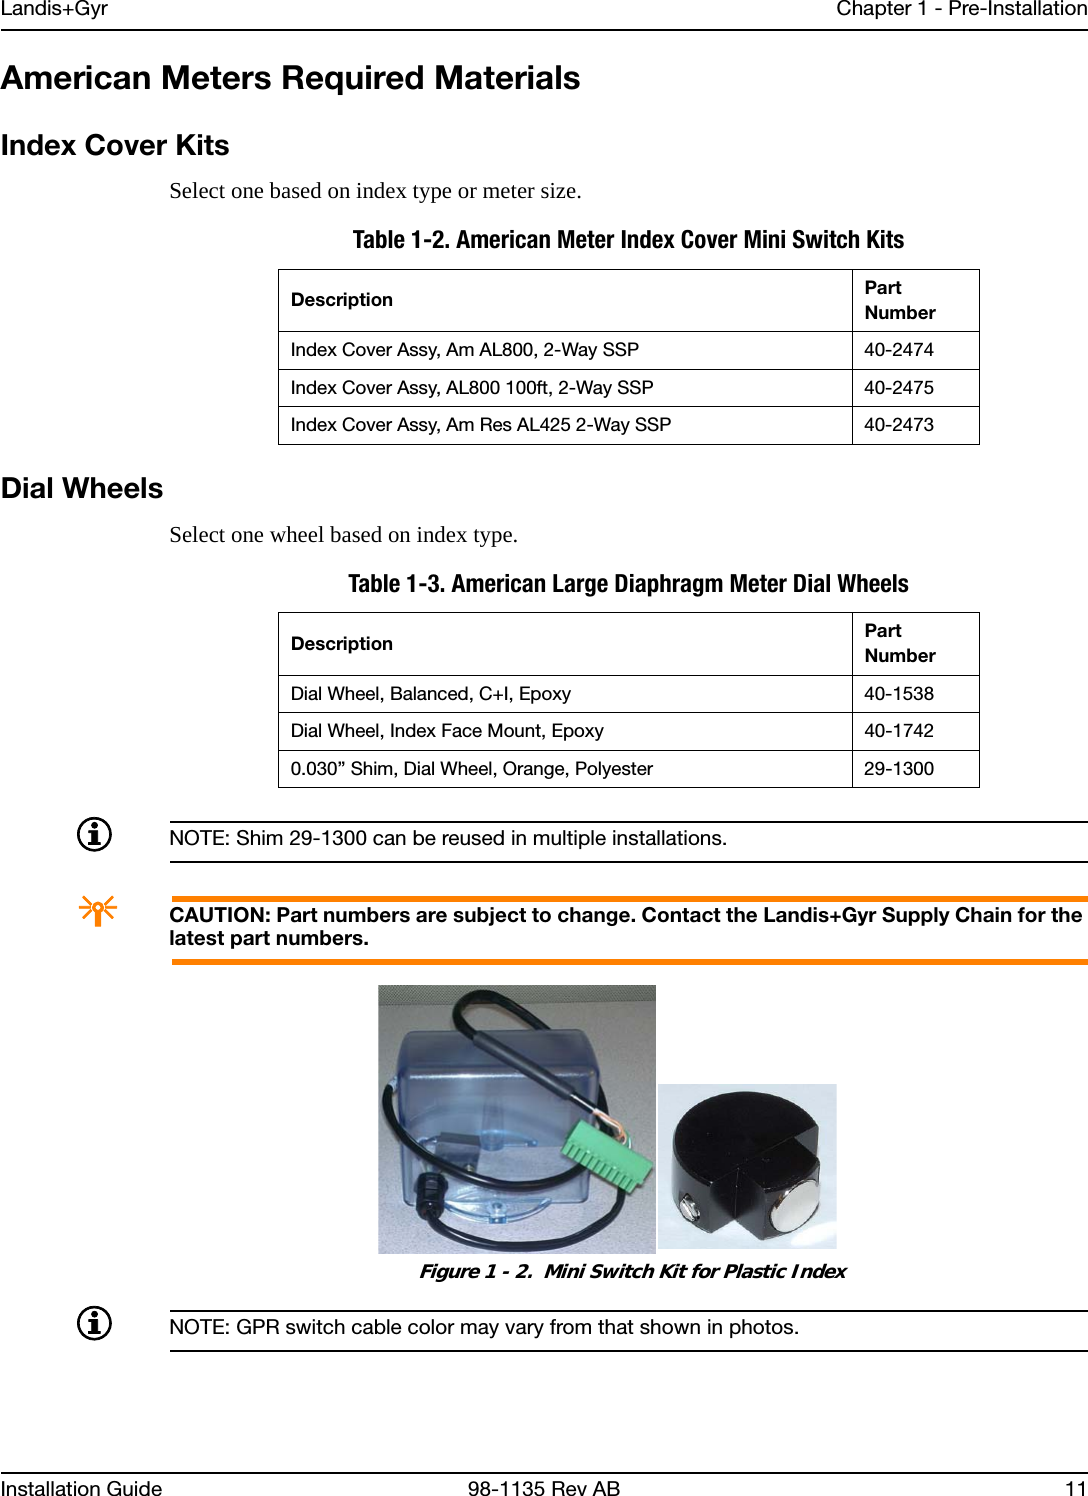 Landis+Gyr Chapter 1 - Pre-InstallationInstallation Guide 98-1135 Rev AB 11American Meters Required MaterialsIndex Cover KitsSelect one based on index type or meter size.Dial WheelsSelect one wheel based on index type.NOTE: Shim 29-1300 can be reused in multiple installations.ACAUTION: Part numbers are subject to change. Contact the Landis+Gyr Supply Chain for the latest part numbers. Figure 1 - 2.  Mini Switch Kit for Plastic IndexNOTE: GPR switch cable color may vary from that shown in photos.Table 1-2. American Meter Index Cover Mini Switch KitsDescription Part NumberIndex Cover Assy, Am AL800, 2-Way SSP 40-2474Index Cover Assy, AL800 100ft, 2-Way SSP 40-2475Index Cover Assy, Am Res AL425 2-Way SSP 40-2473Table 1-3. American Large Diaphragm Meter Dial WheelsDescription Part NumberDial Wheel, Balanced, C+I, Epoxy 40-1538Dial Wheel, Index Face Mount, Epoxy 40-17420.030” Shim, Dial Wheel, Orange, Polyester 29-1300